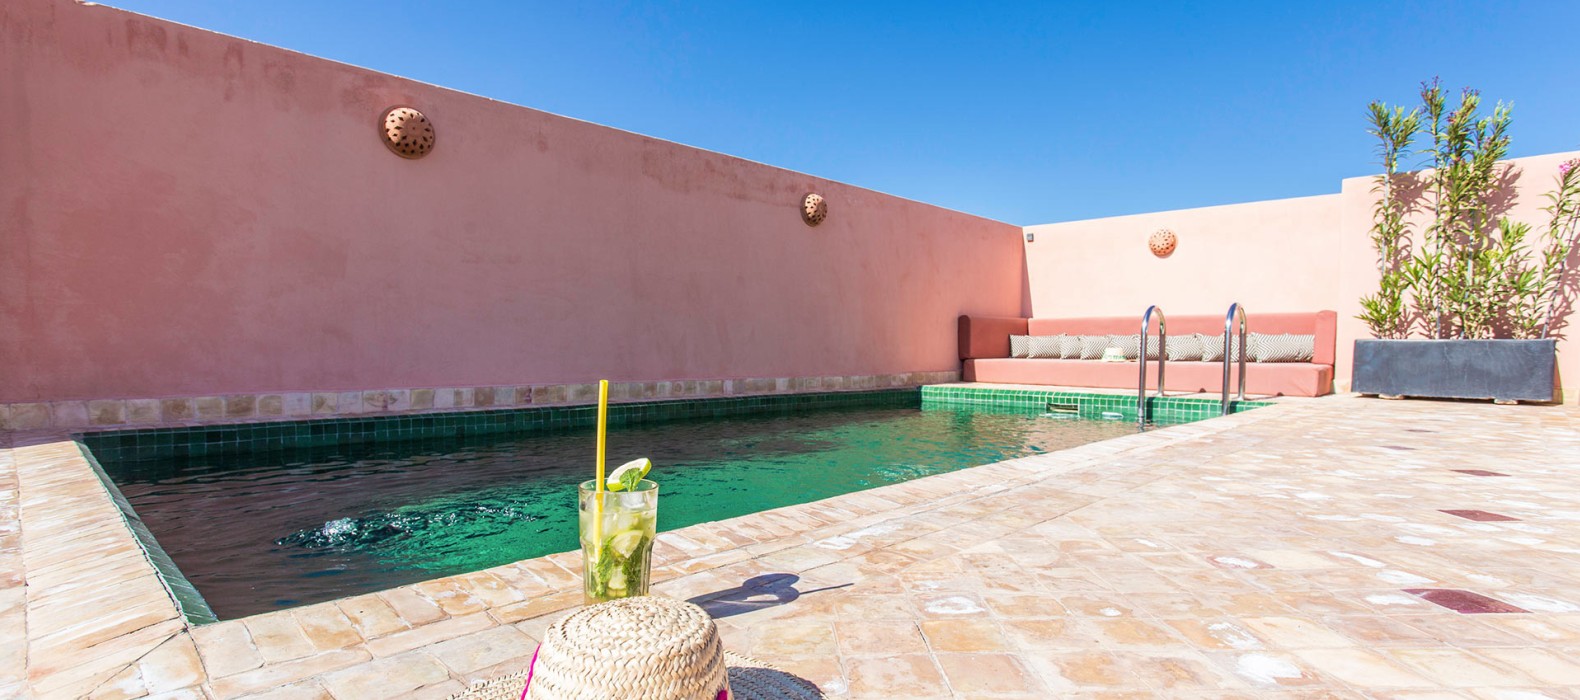 Rooftop pool view of Riad Mima in Marrakech